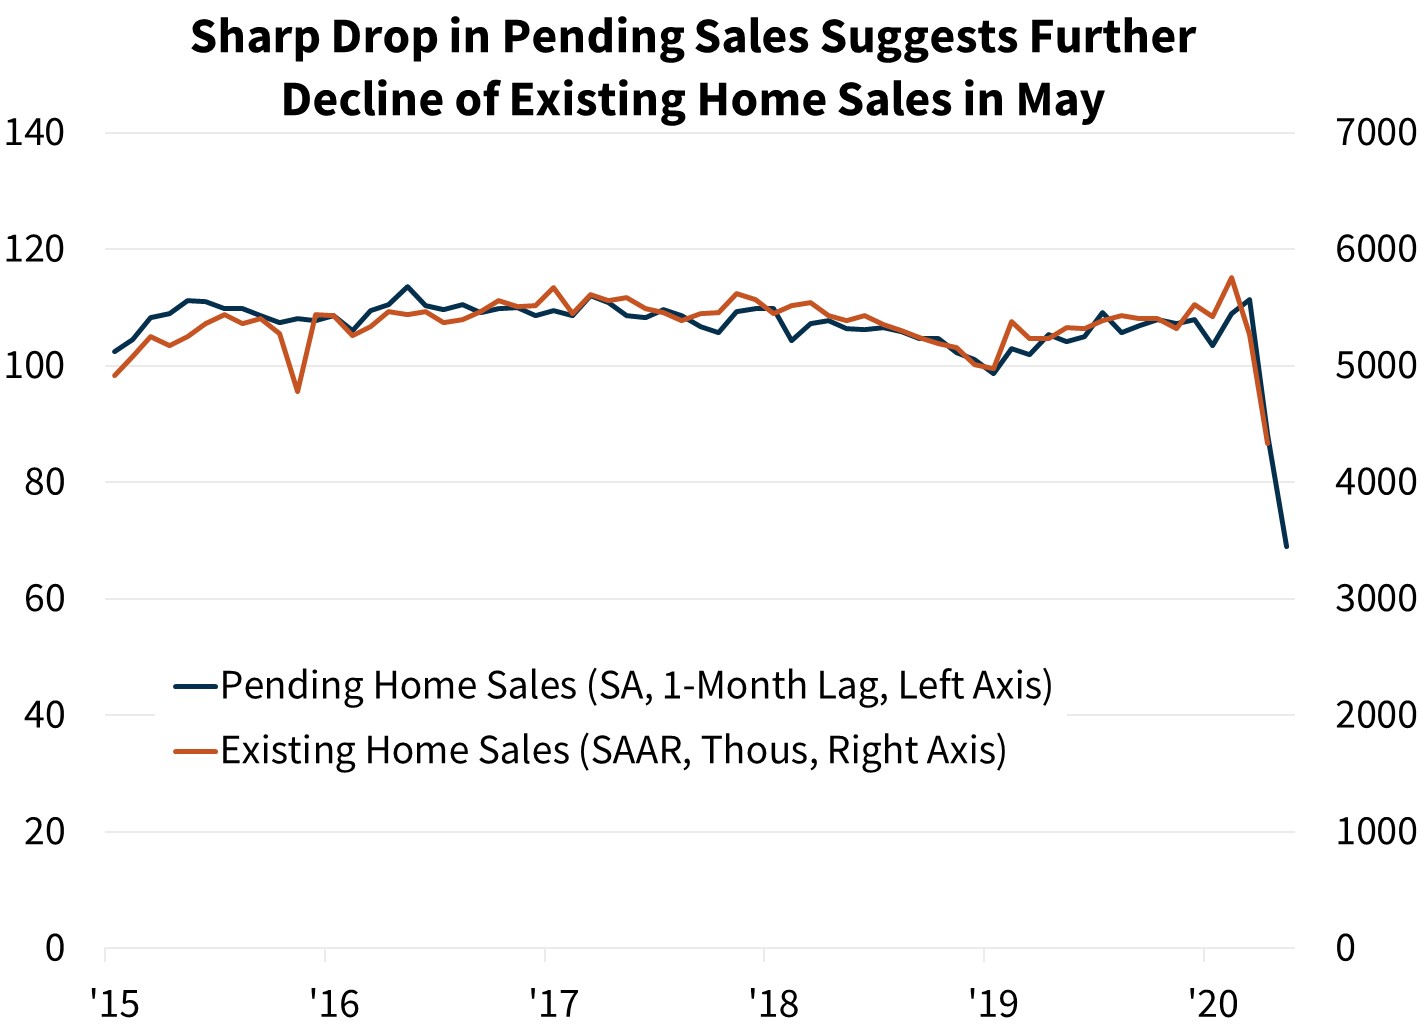  Sharp Drop in Pending Sales Suggests Further Decline of Existing Home Sales in May